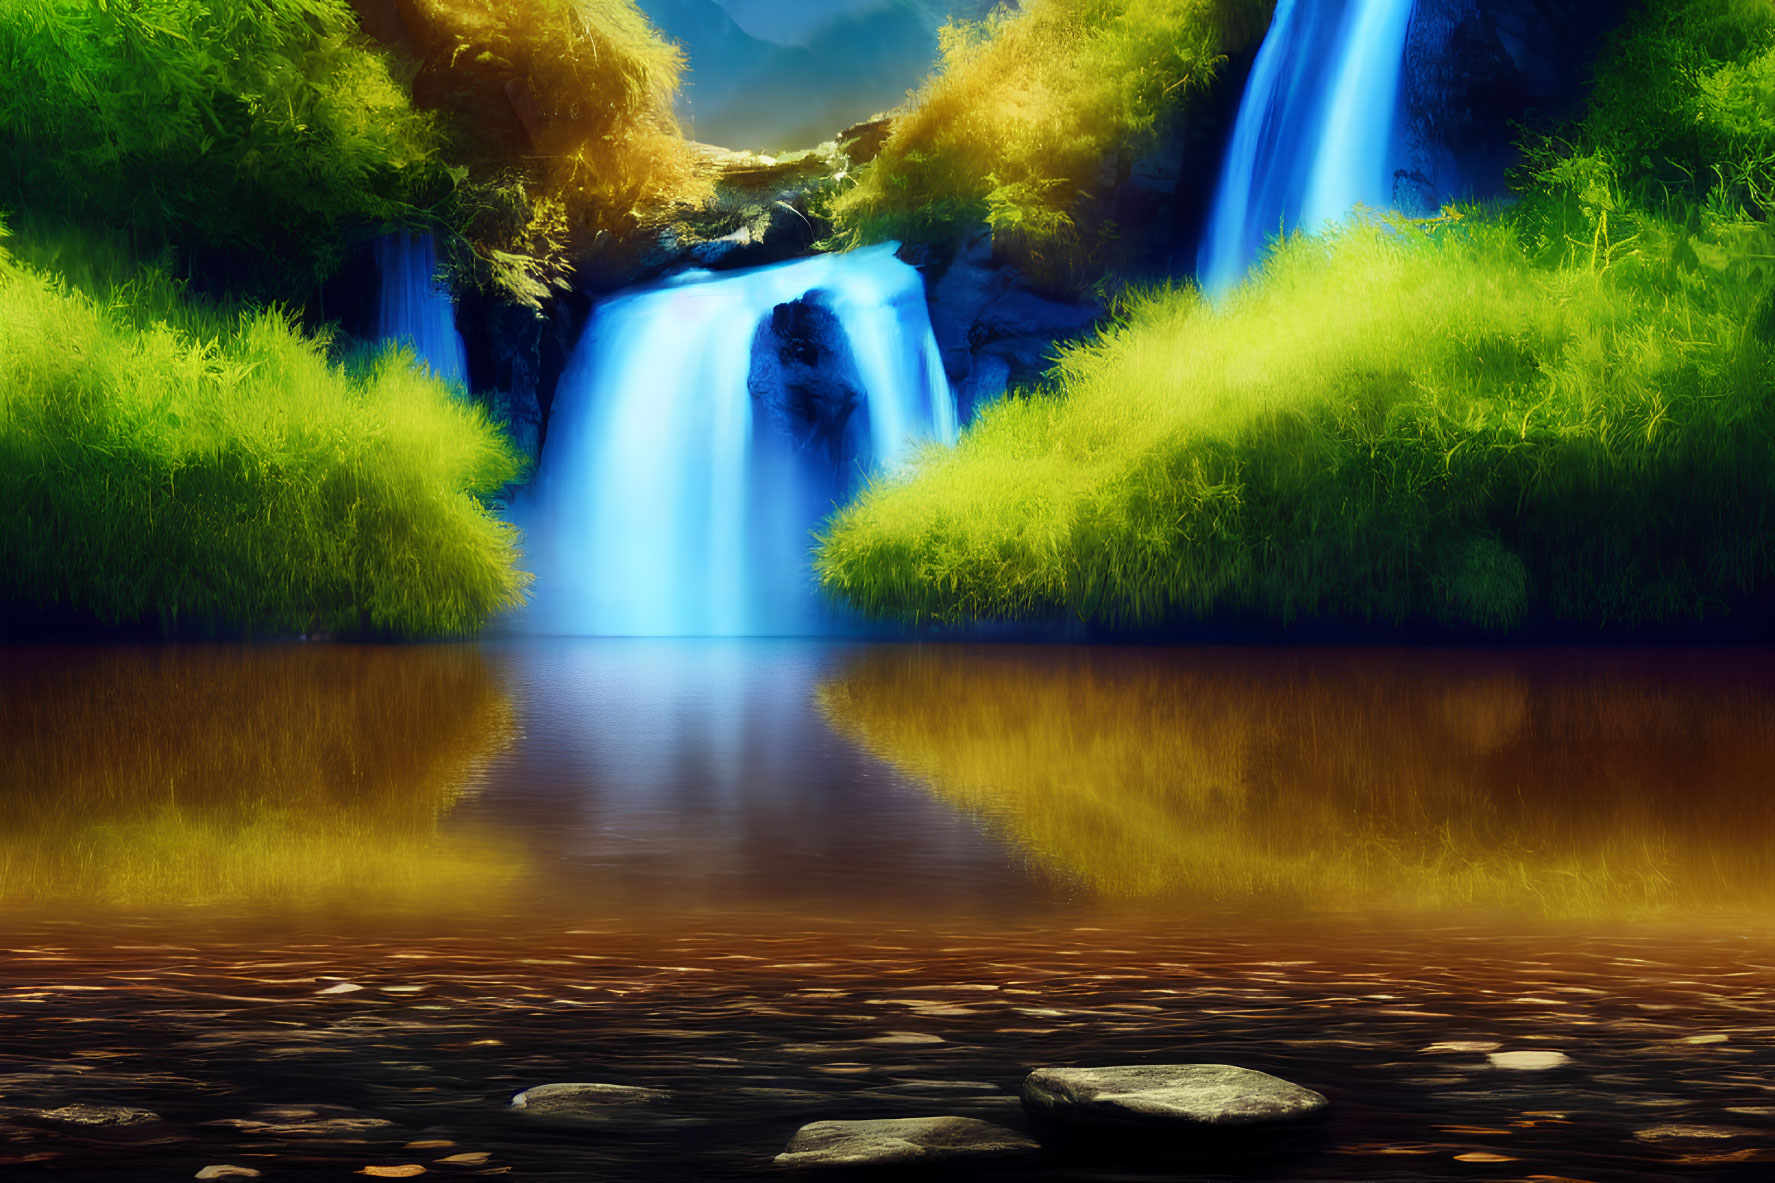 Tranquil waterfall with blue water, green foliage, and sunny sky